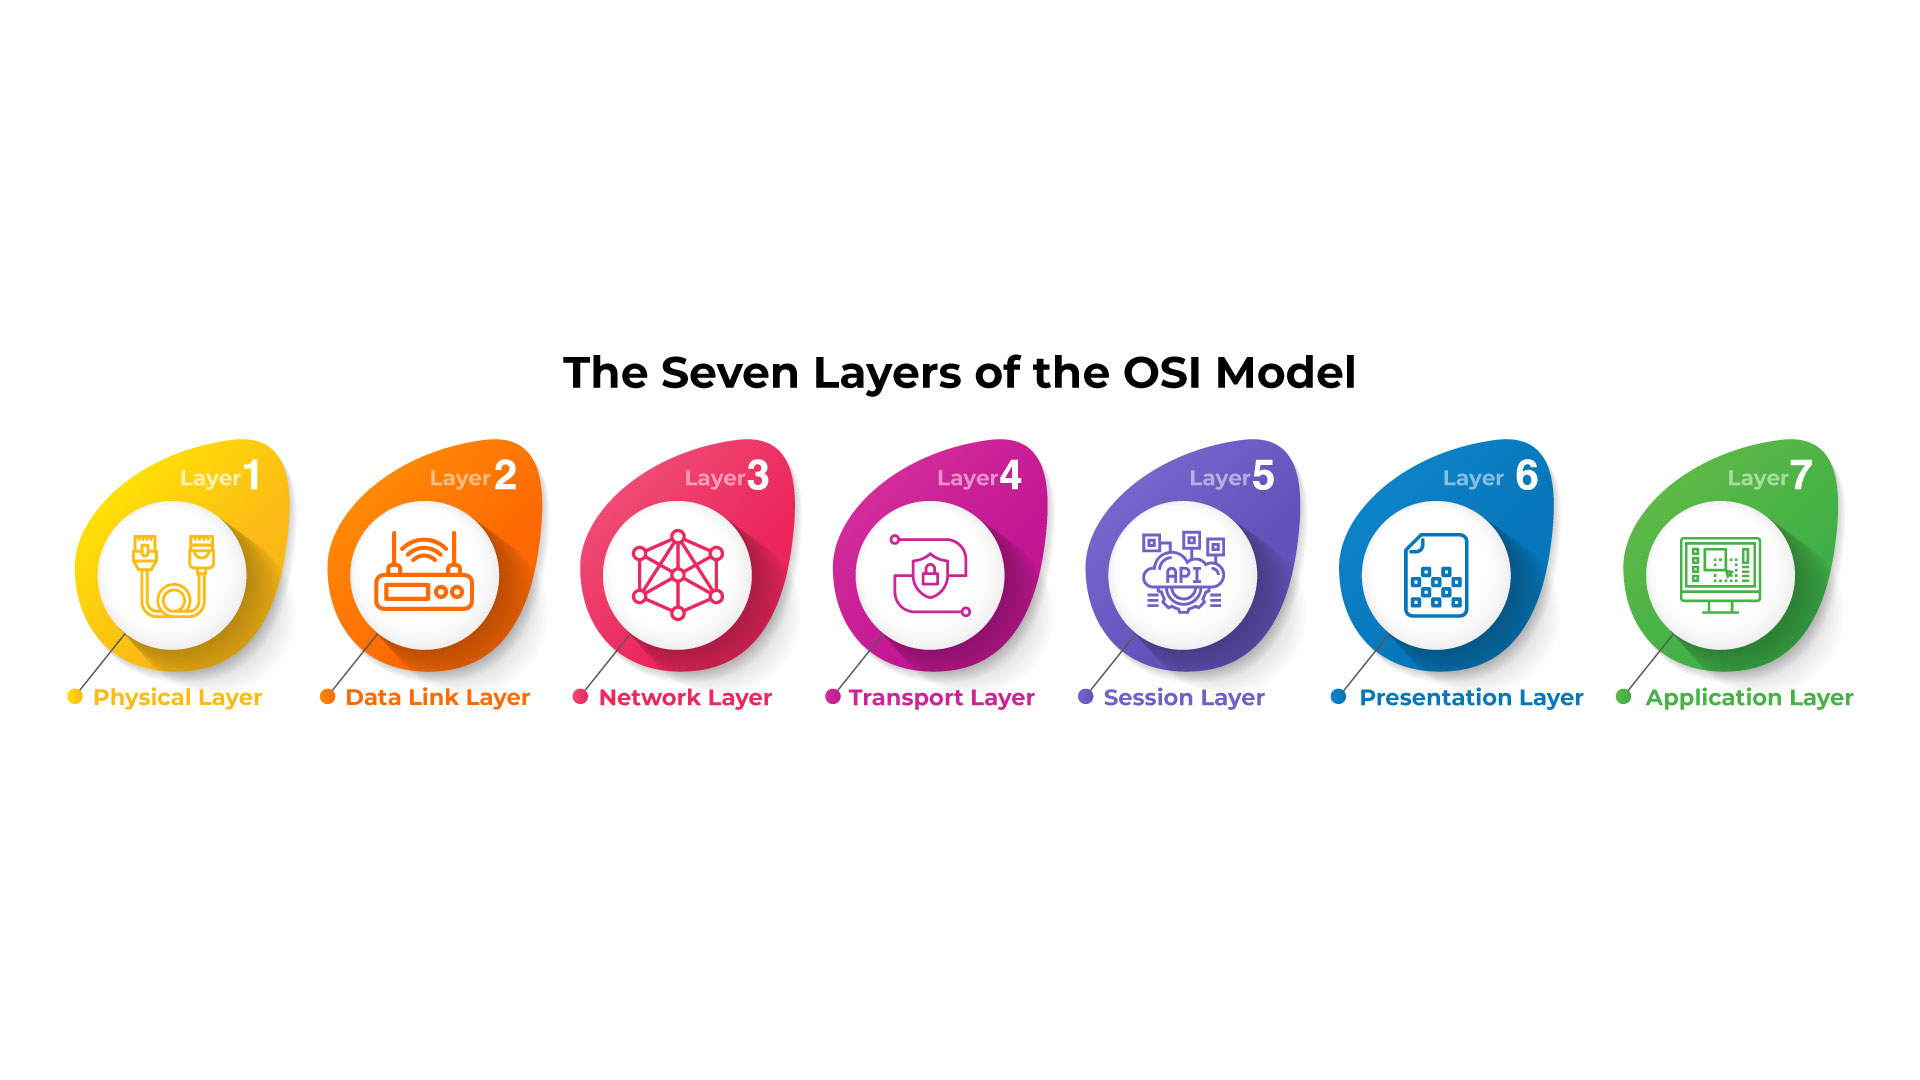 The Seven Layers of the OSI Model